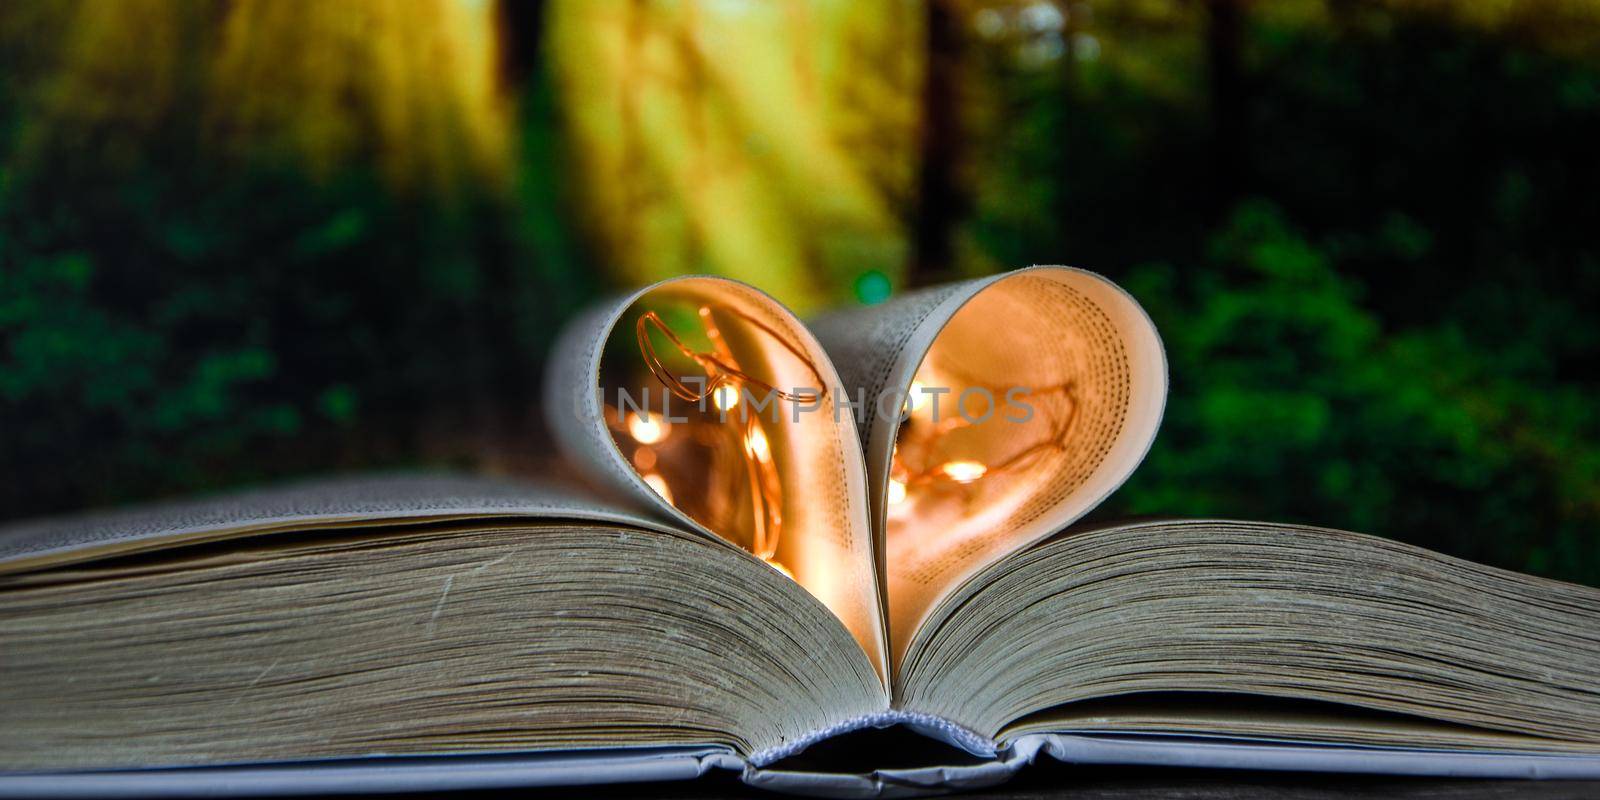 Book with love symbol isolated on forest nature background, Love books, love to read, love stories, heart shape from paper book, Romantic background with the book